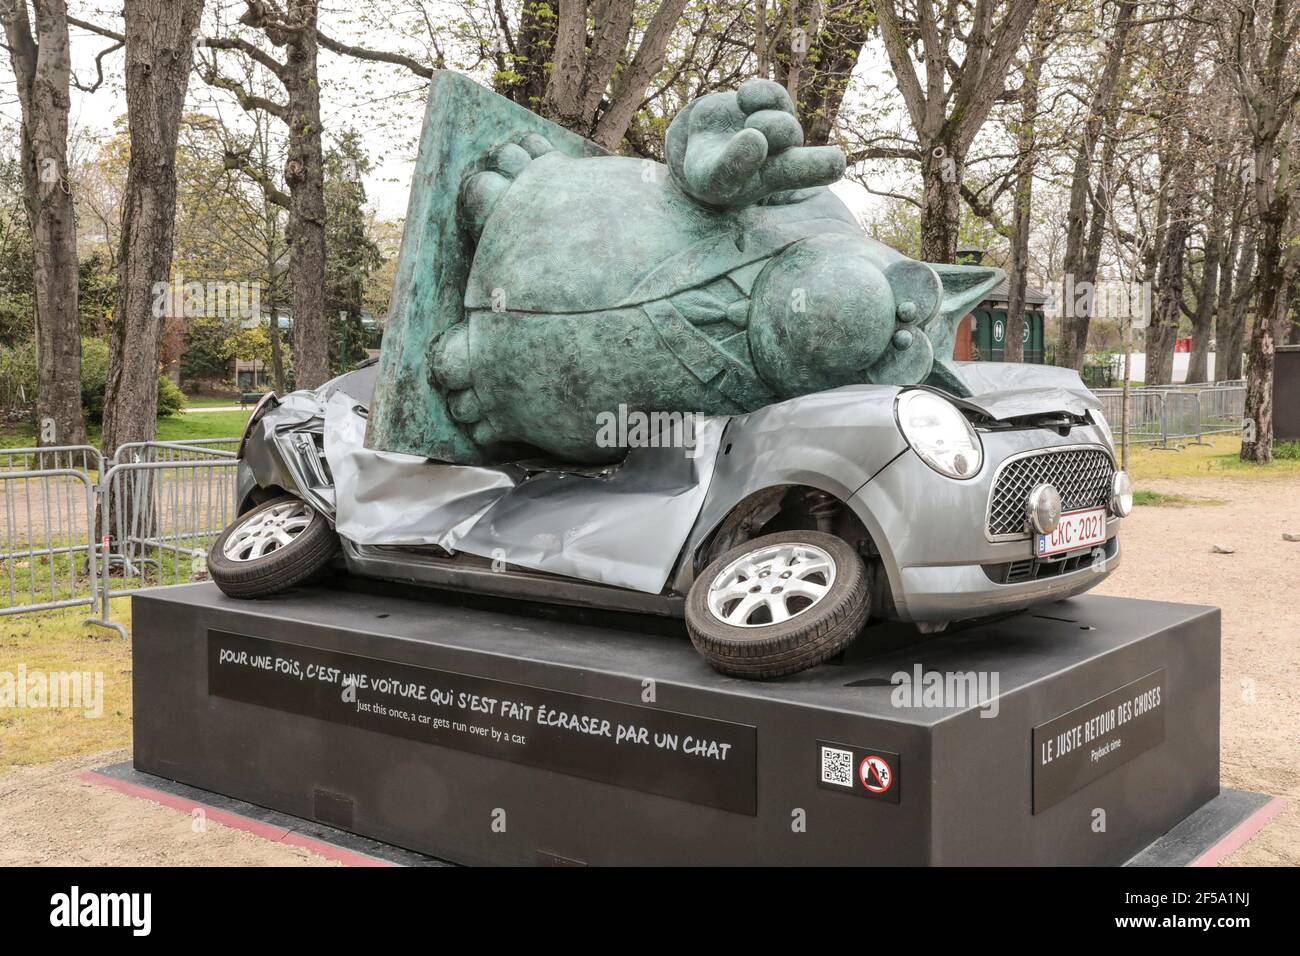 LE CHAT BY PHILIPPE GELUCK TWENTY SCULPTURES ON CHAMPS ELYSEES, PARIS Stock  Photo - Alamy